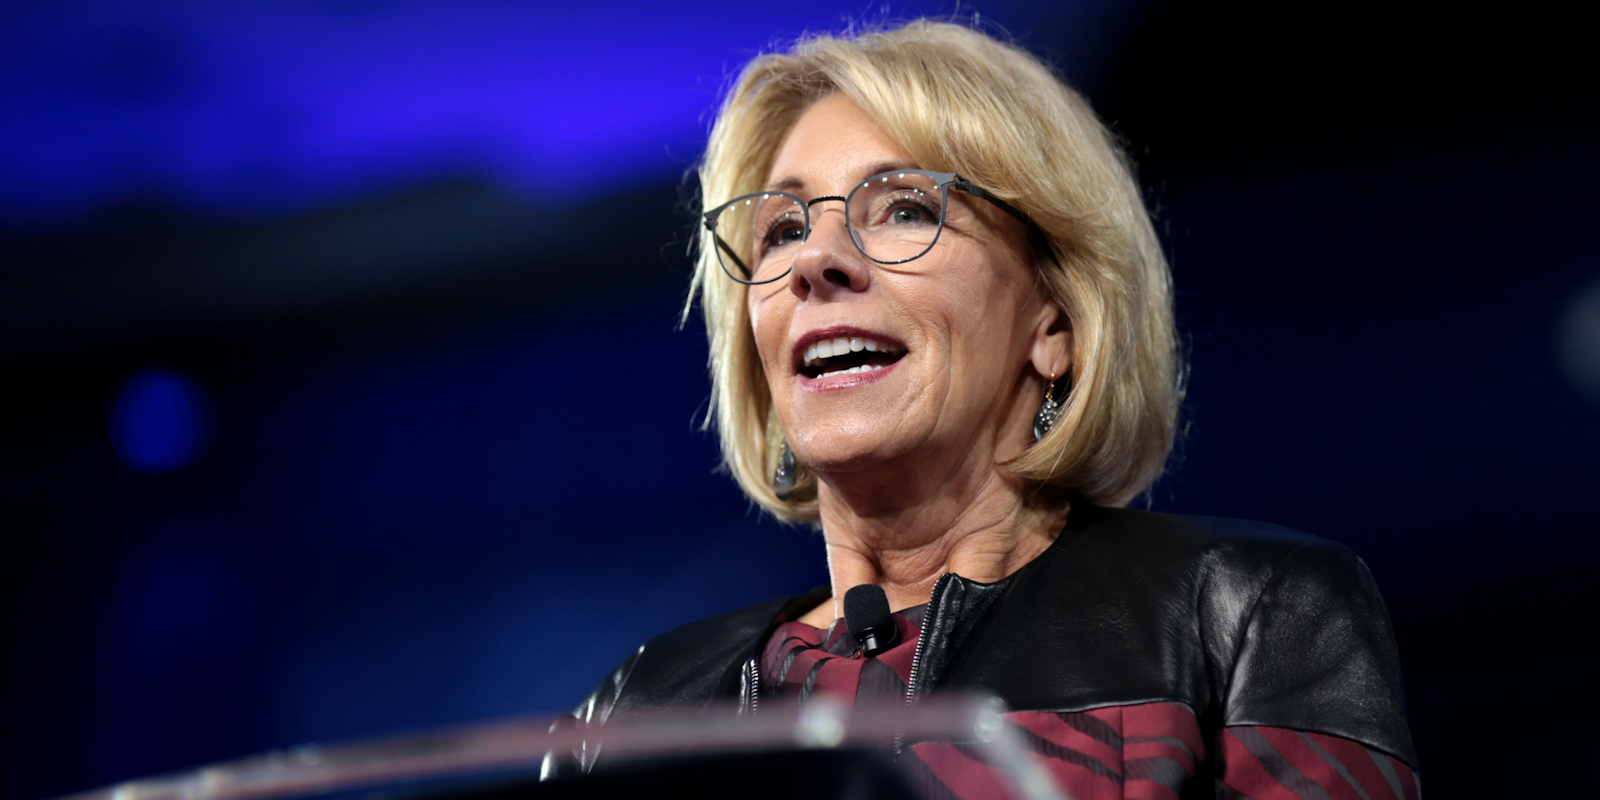 Betsy Devos speaking at the 2017 Conservative Political Action Conference (CPAC) in National Harbor, Maryland